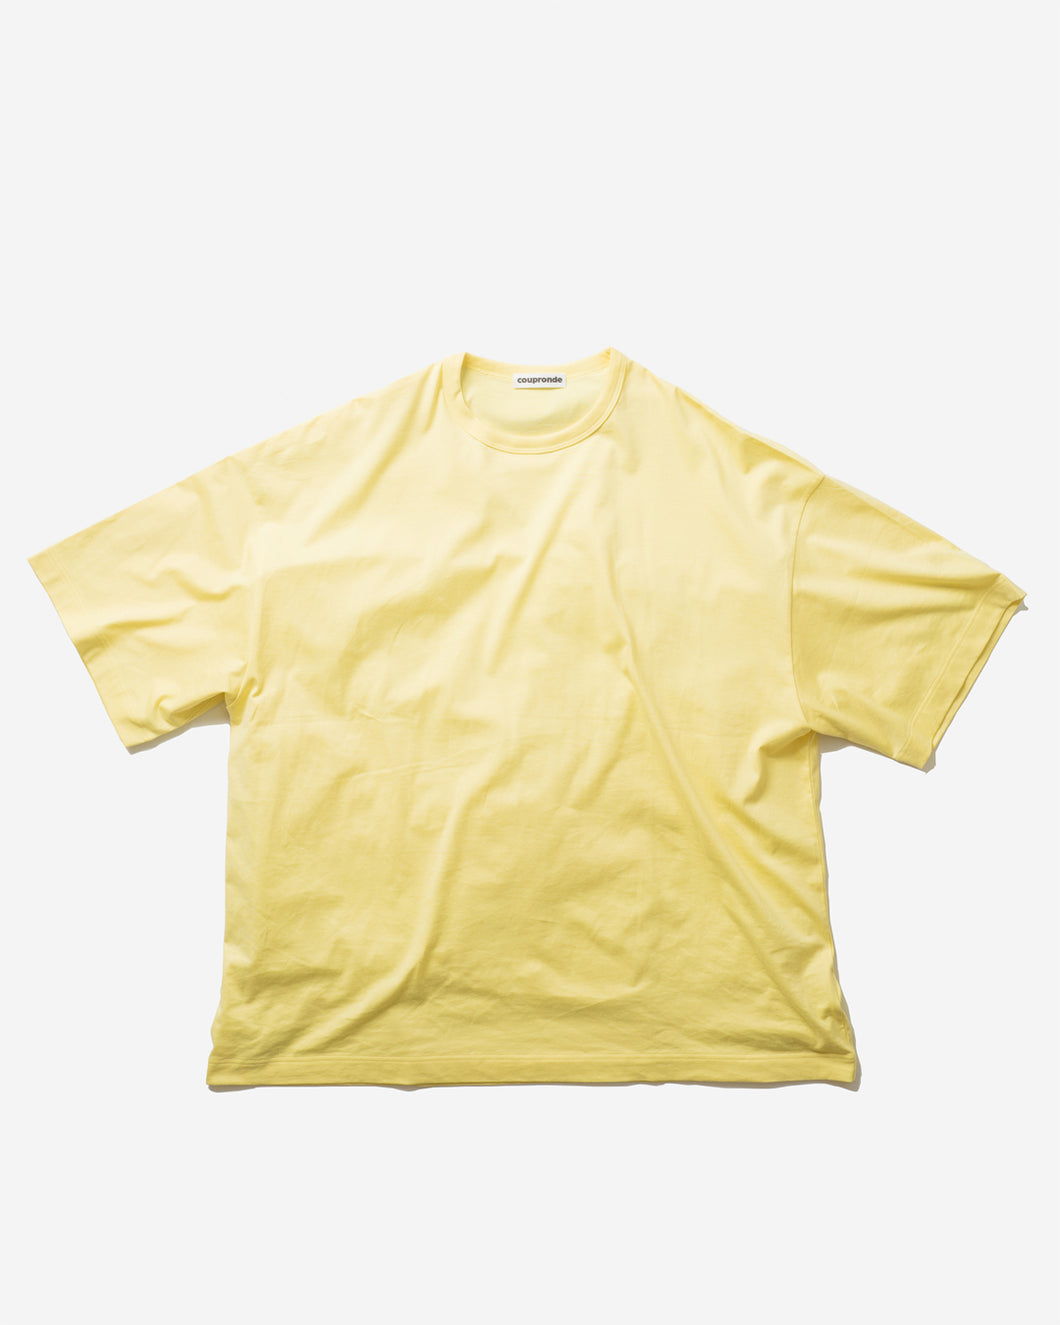 OVER SIZED SHORT SLEEVE YELLOW